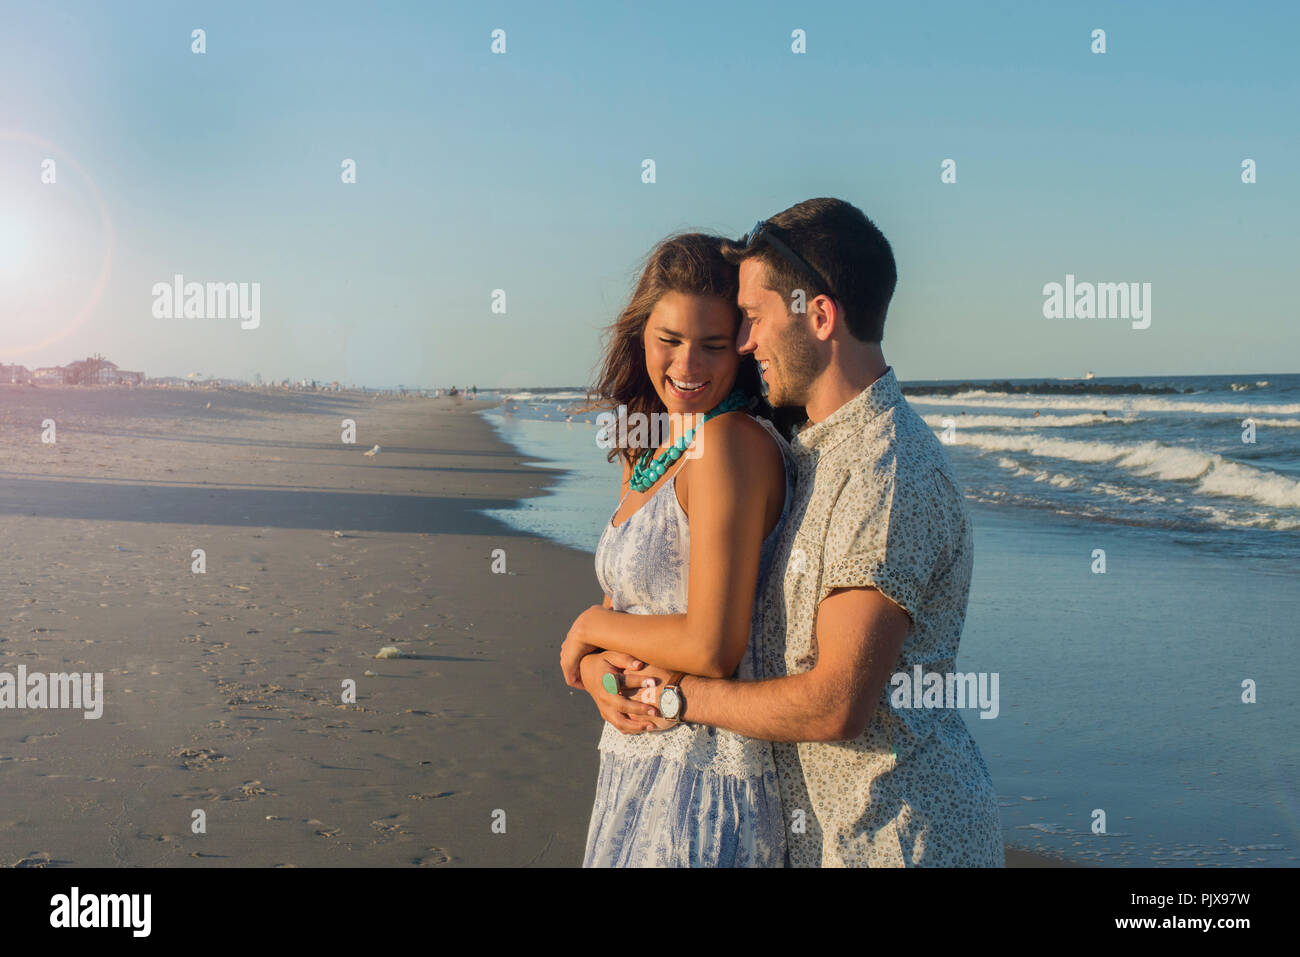 Young couple hugging on beach, Spring Lake, New Jersey, USA Banque D'Images